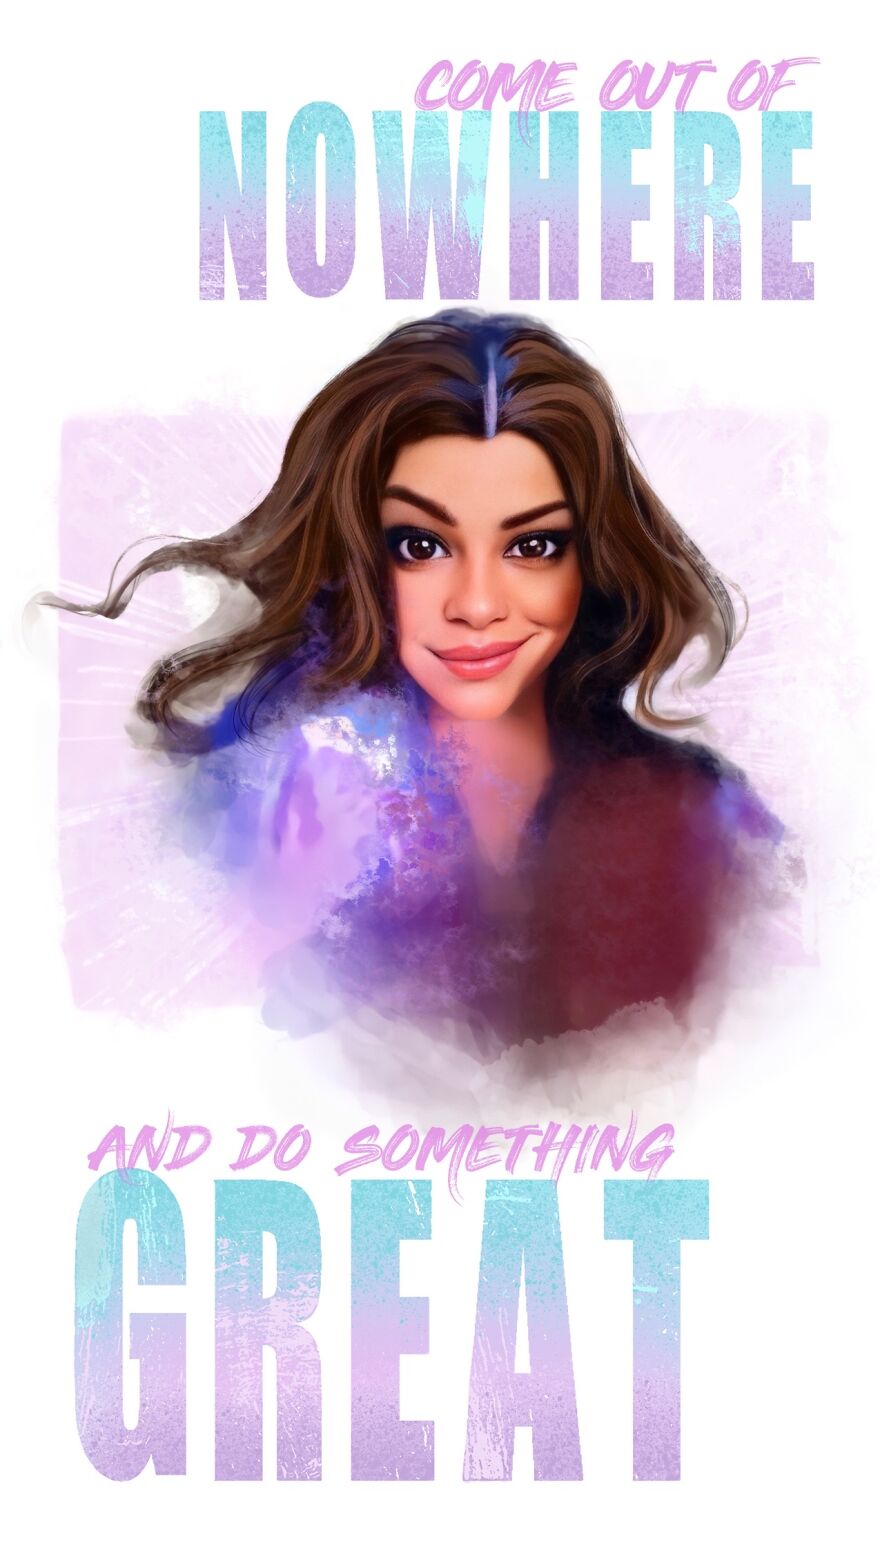 I Combined Drawing And Ai To Cartoon 20 Posters Of Super Women Being The Relatable Bffs We All Need.